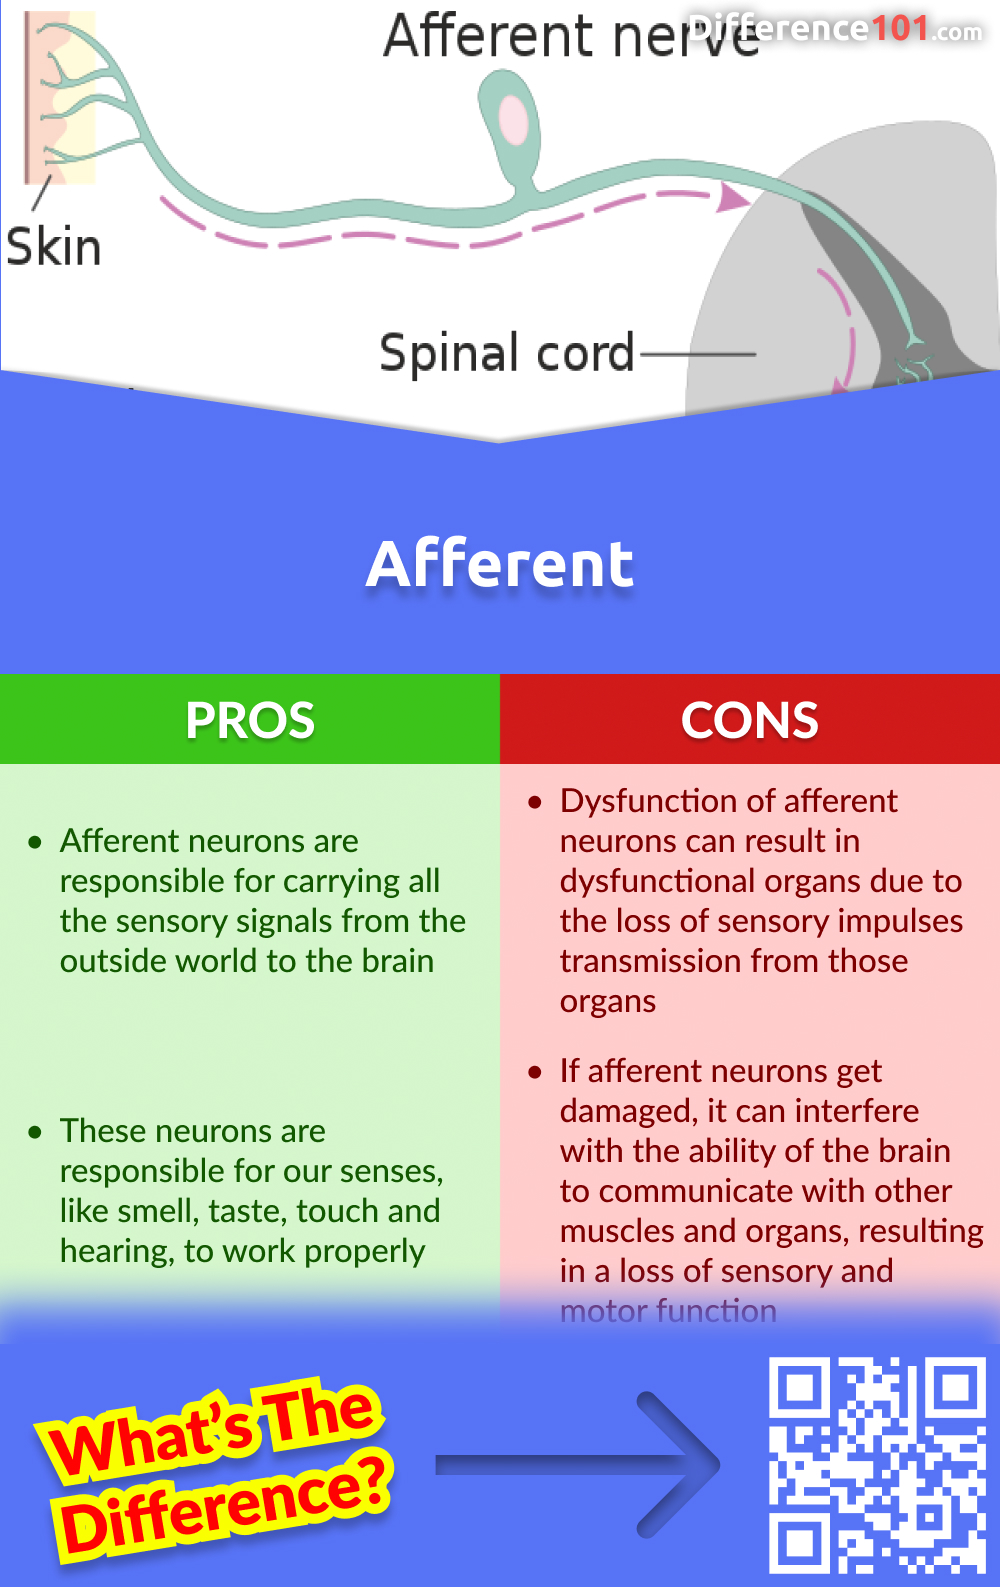 Afferent Pros and Cons